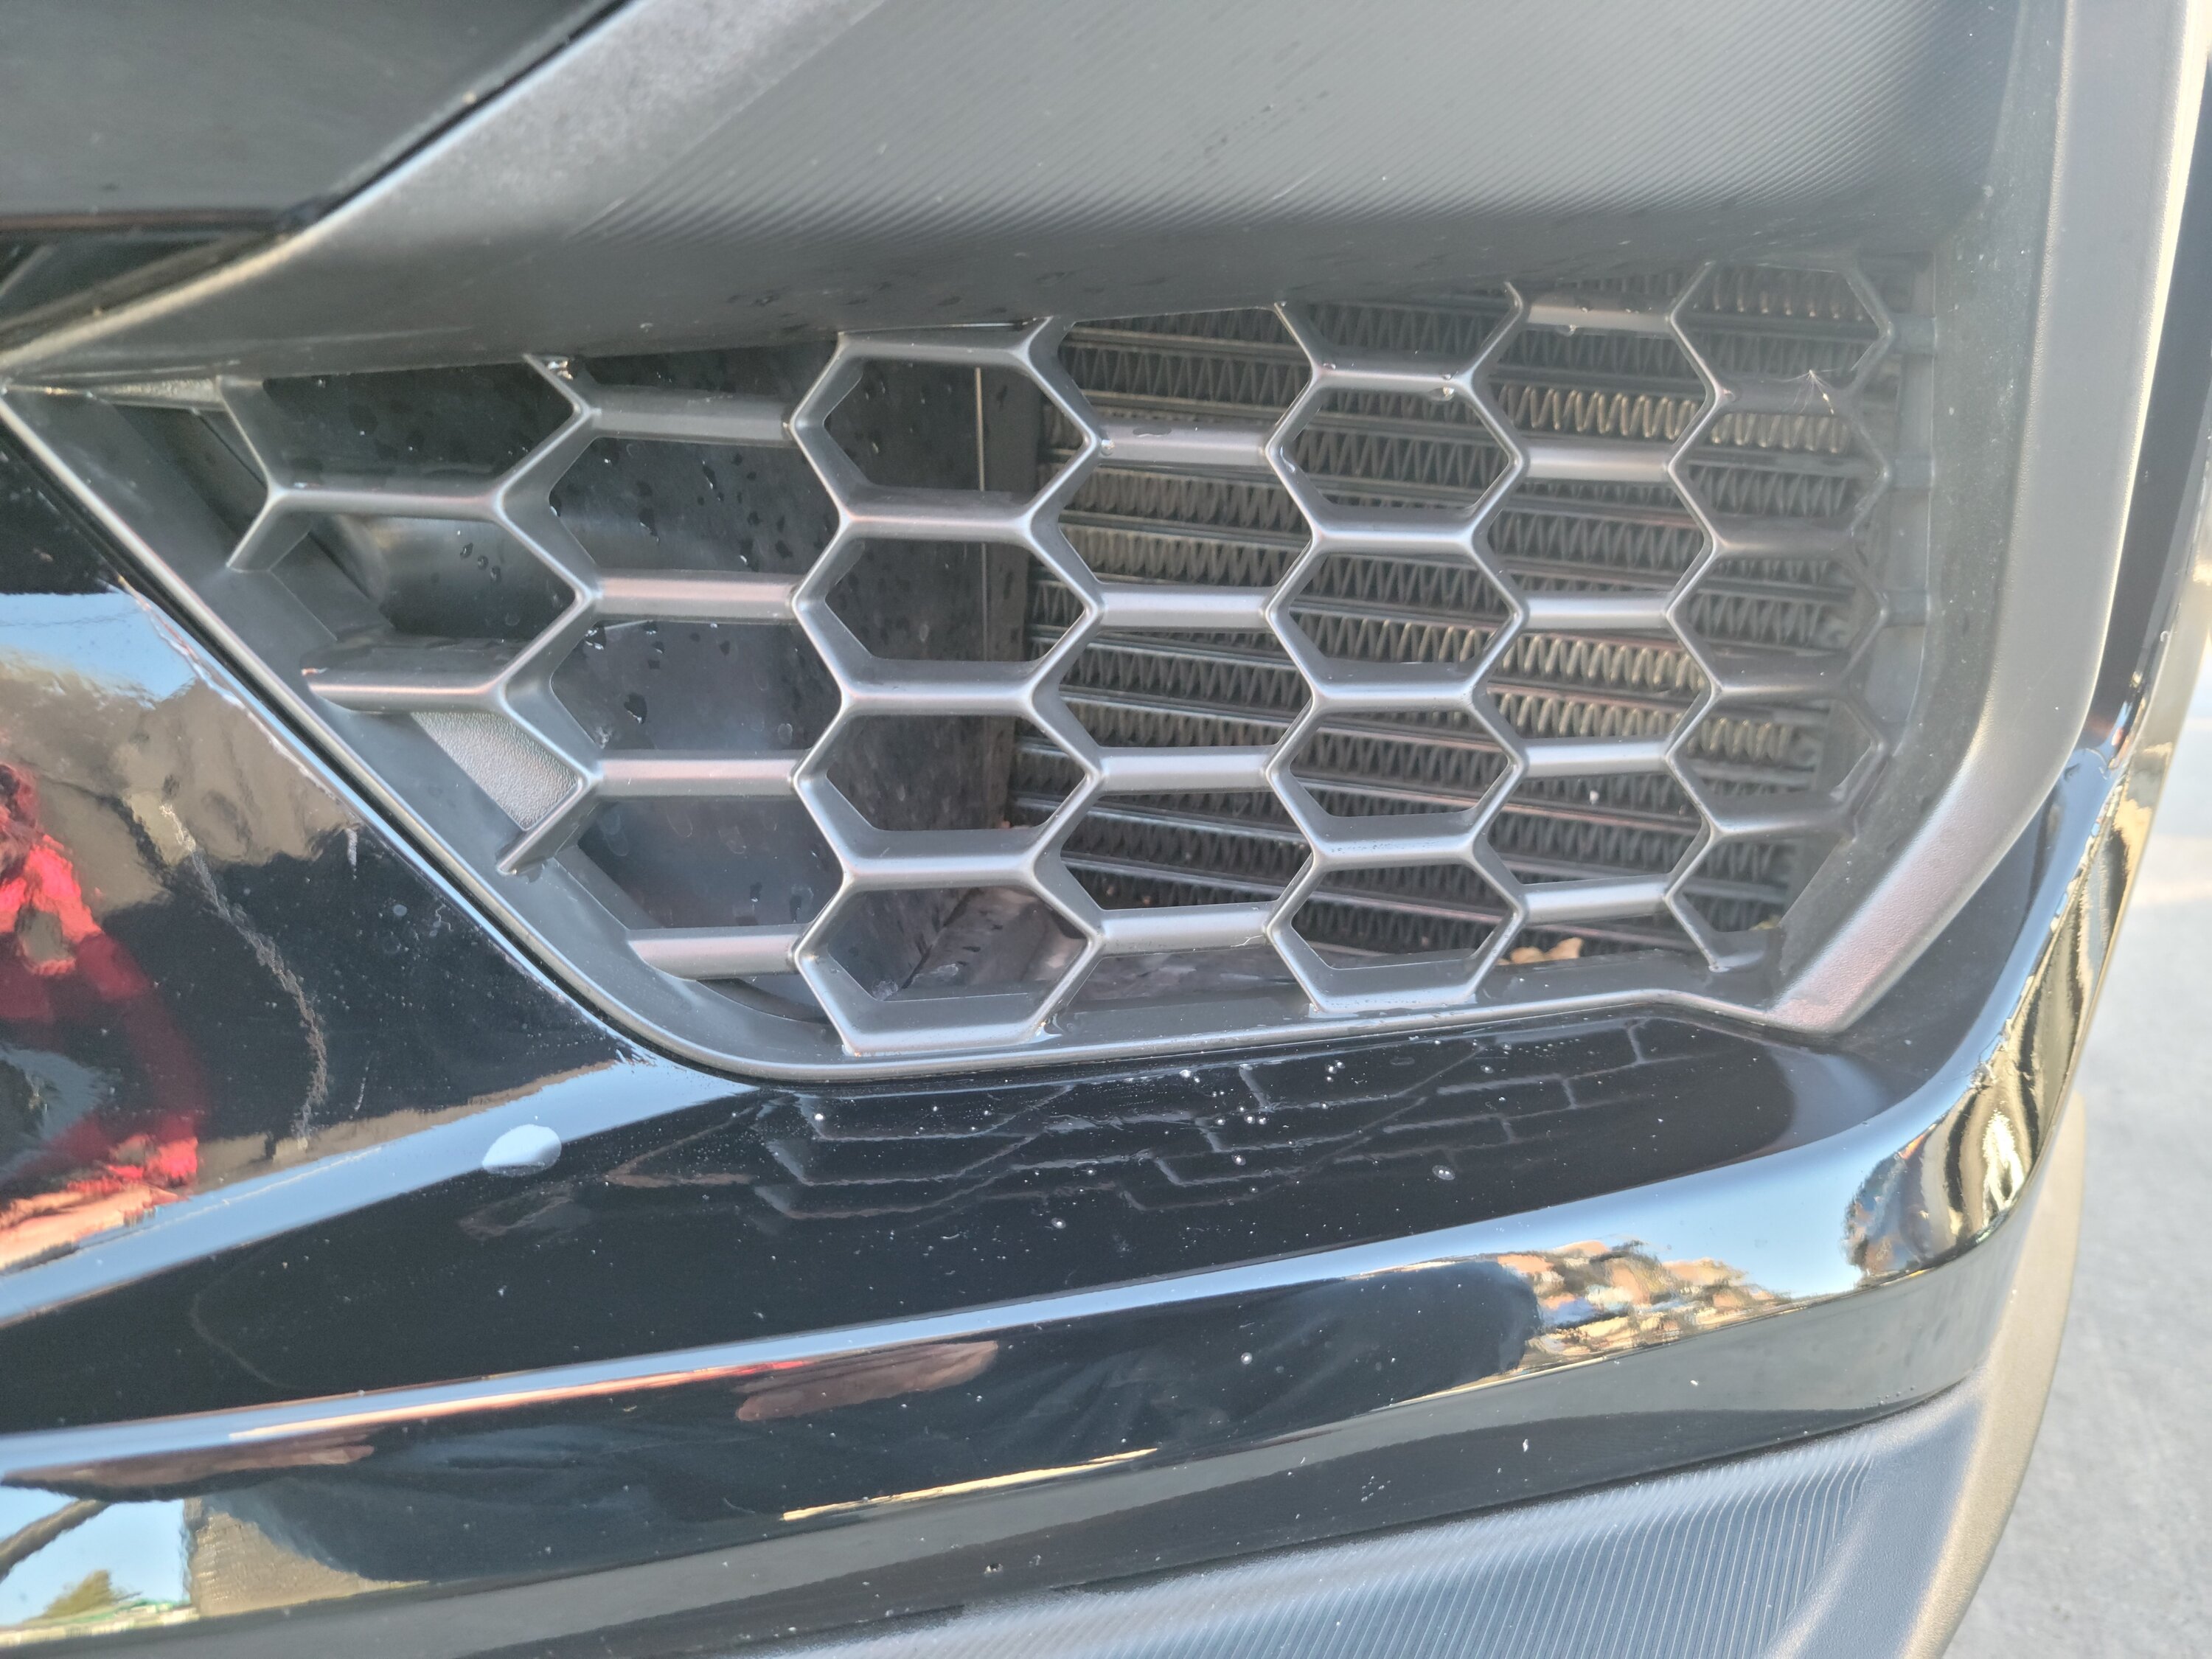 S650 Mustang Question on Performance Pack S650 vs. S550 driver side grille further back